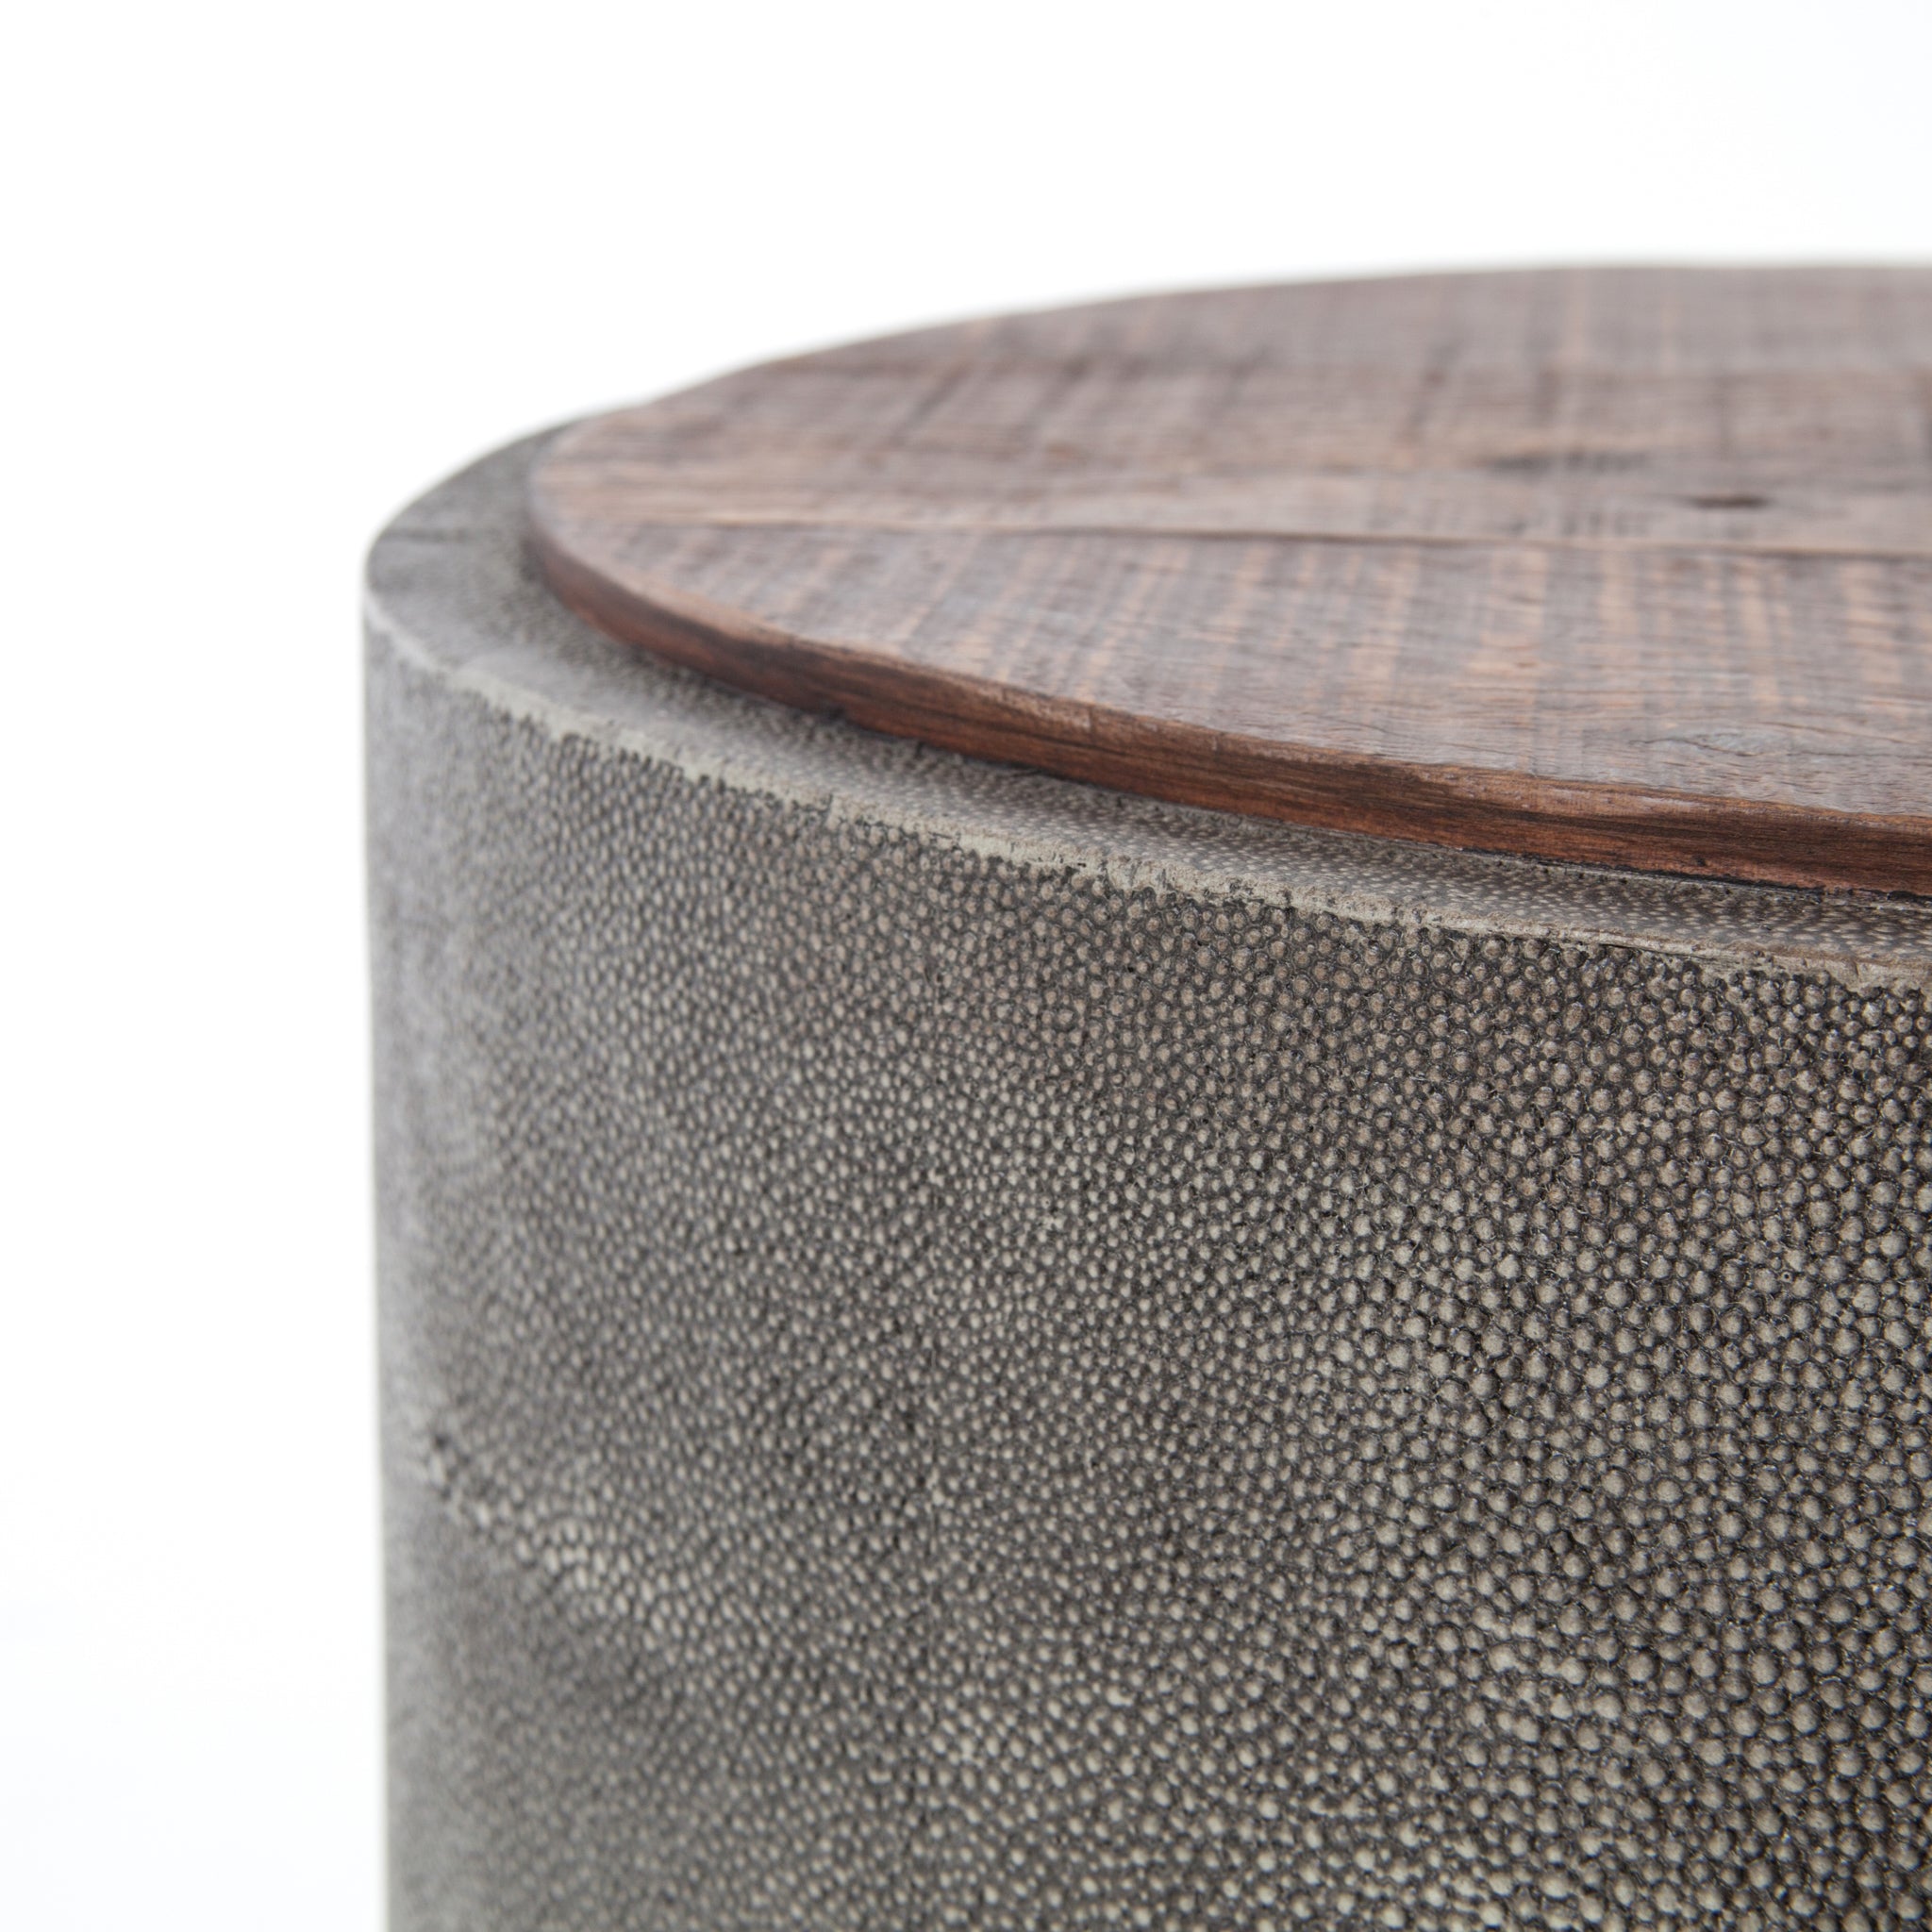 Mixed materials and the simplest of shapes are sized to make a perfect side table. Reclaimed peroba wood is supported by a textural faux shagreen base in soft grey. This piece is designed in collaboration with Thomas Bina. Amethyst Home provides interior design, new construction, custom furniture, and area rugs in the Portland metro area.